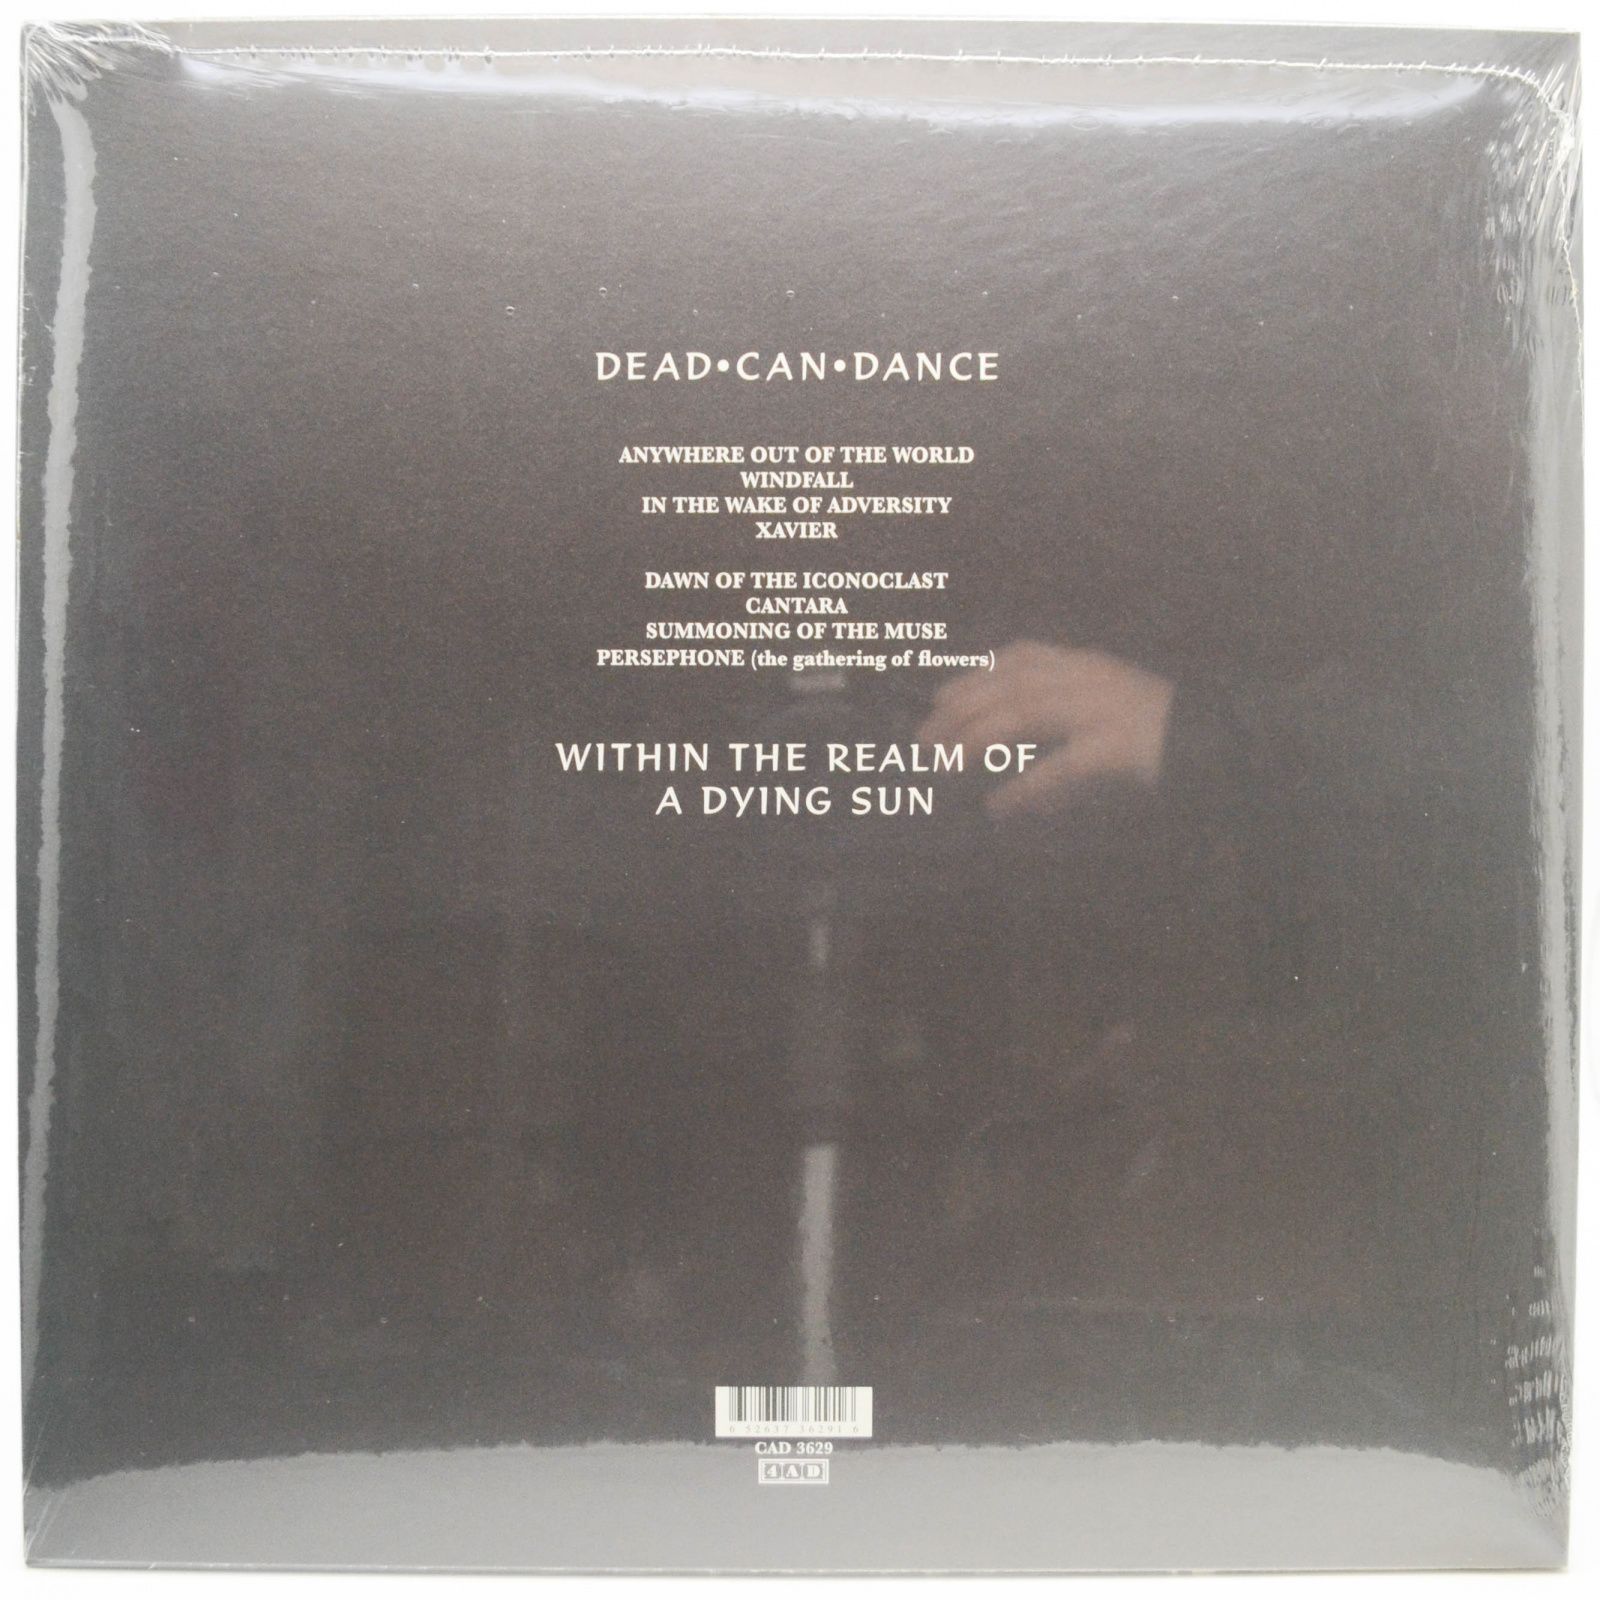 Dead Can Dance — Within The Realm Of A Dying Sun (UK), 1987